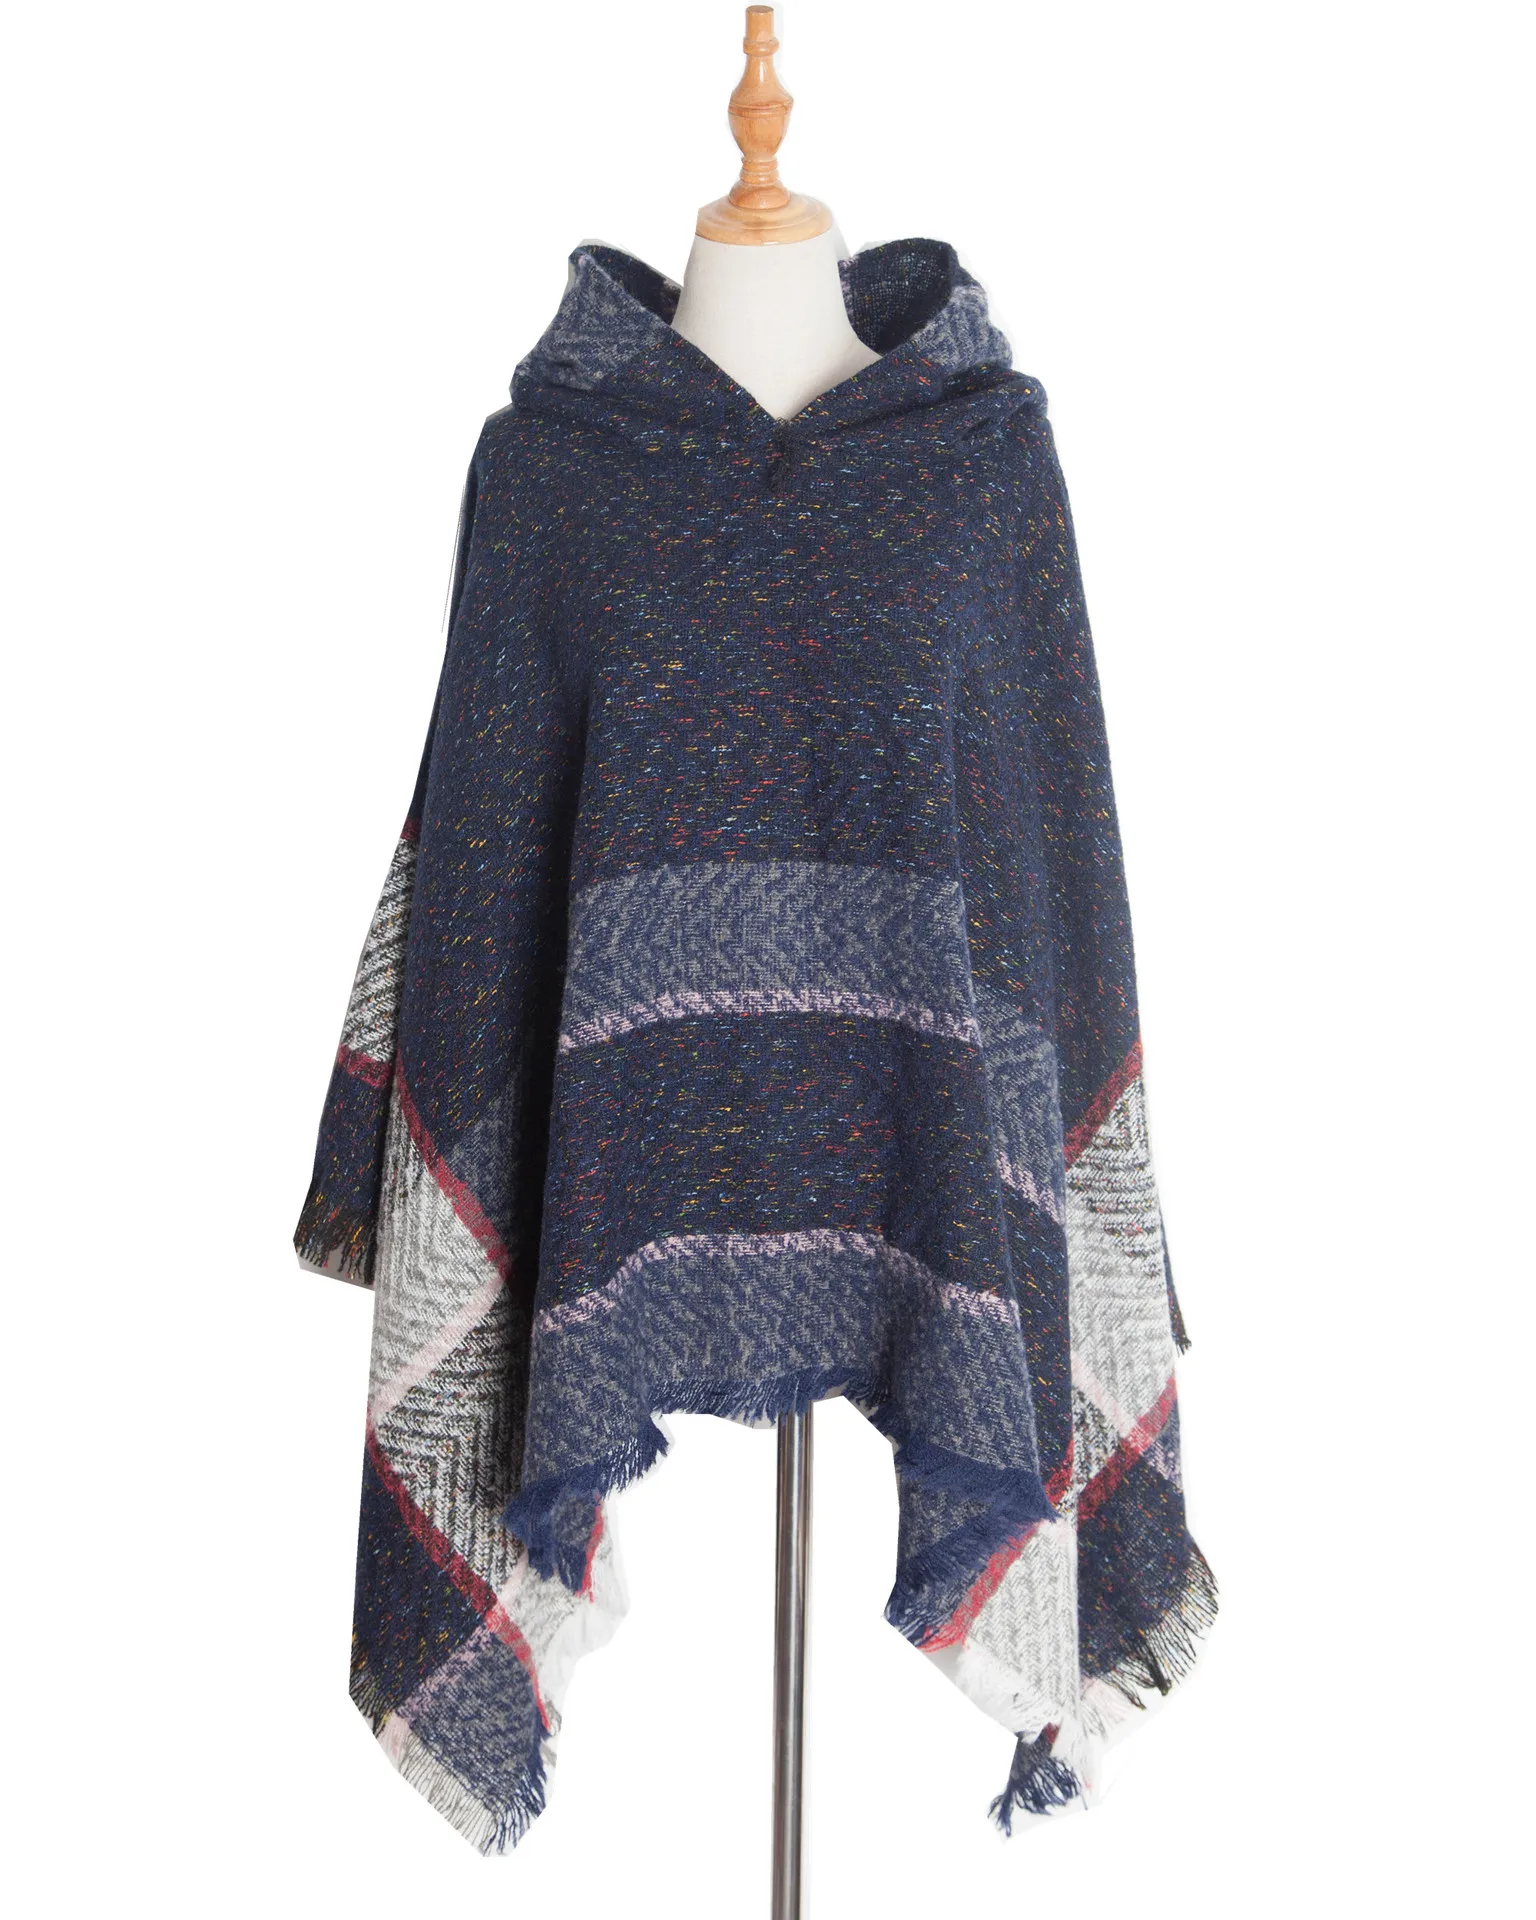 New Autumn Winter Fishbone Pattern Women's Hooded Cape Pullover Cape Women Poncho Lady Capes Navy Cloaks 2020 autumn striped fur neck cloak women cape embroidered colourfull feather poncho triangle pullover black batwing sleeves coat